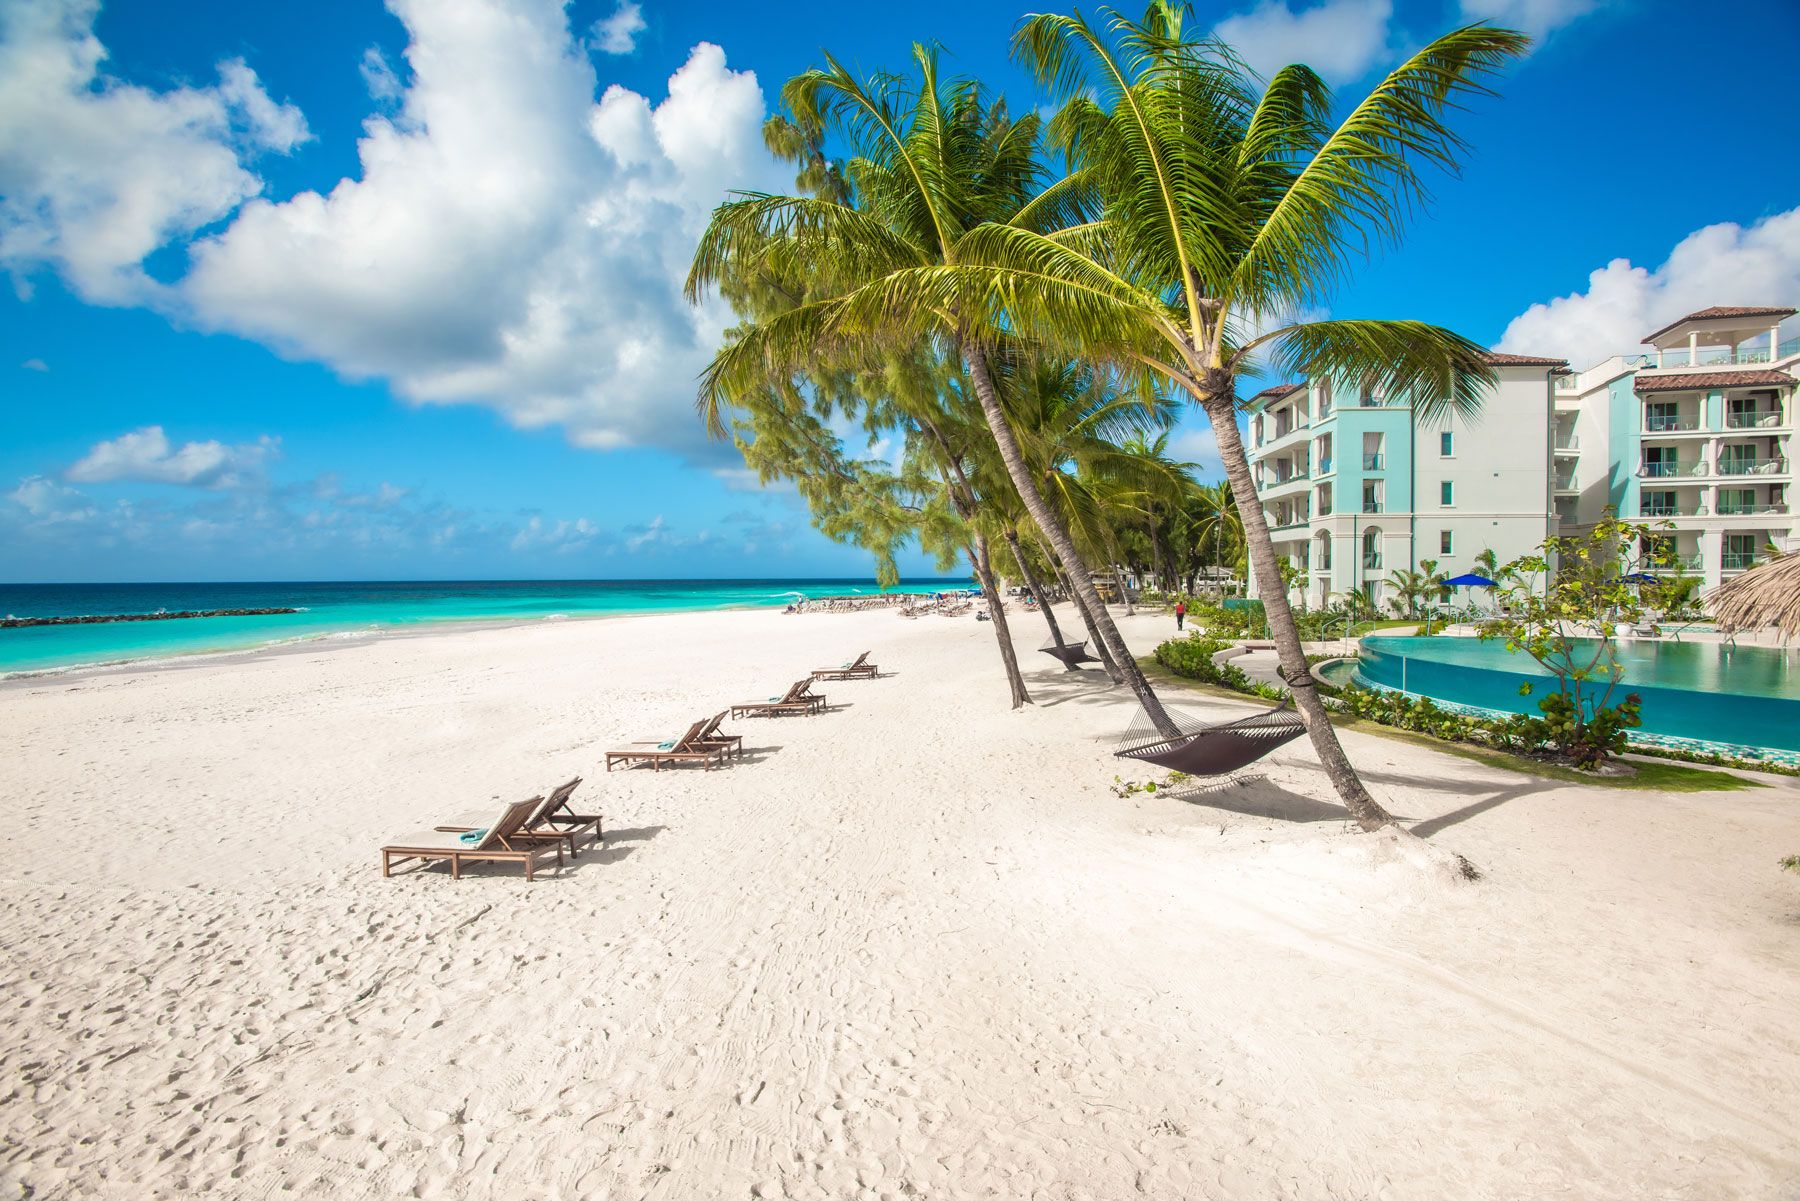 Three things guests love about... Sandals Royal Barbados. A full review.